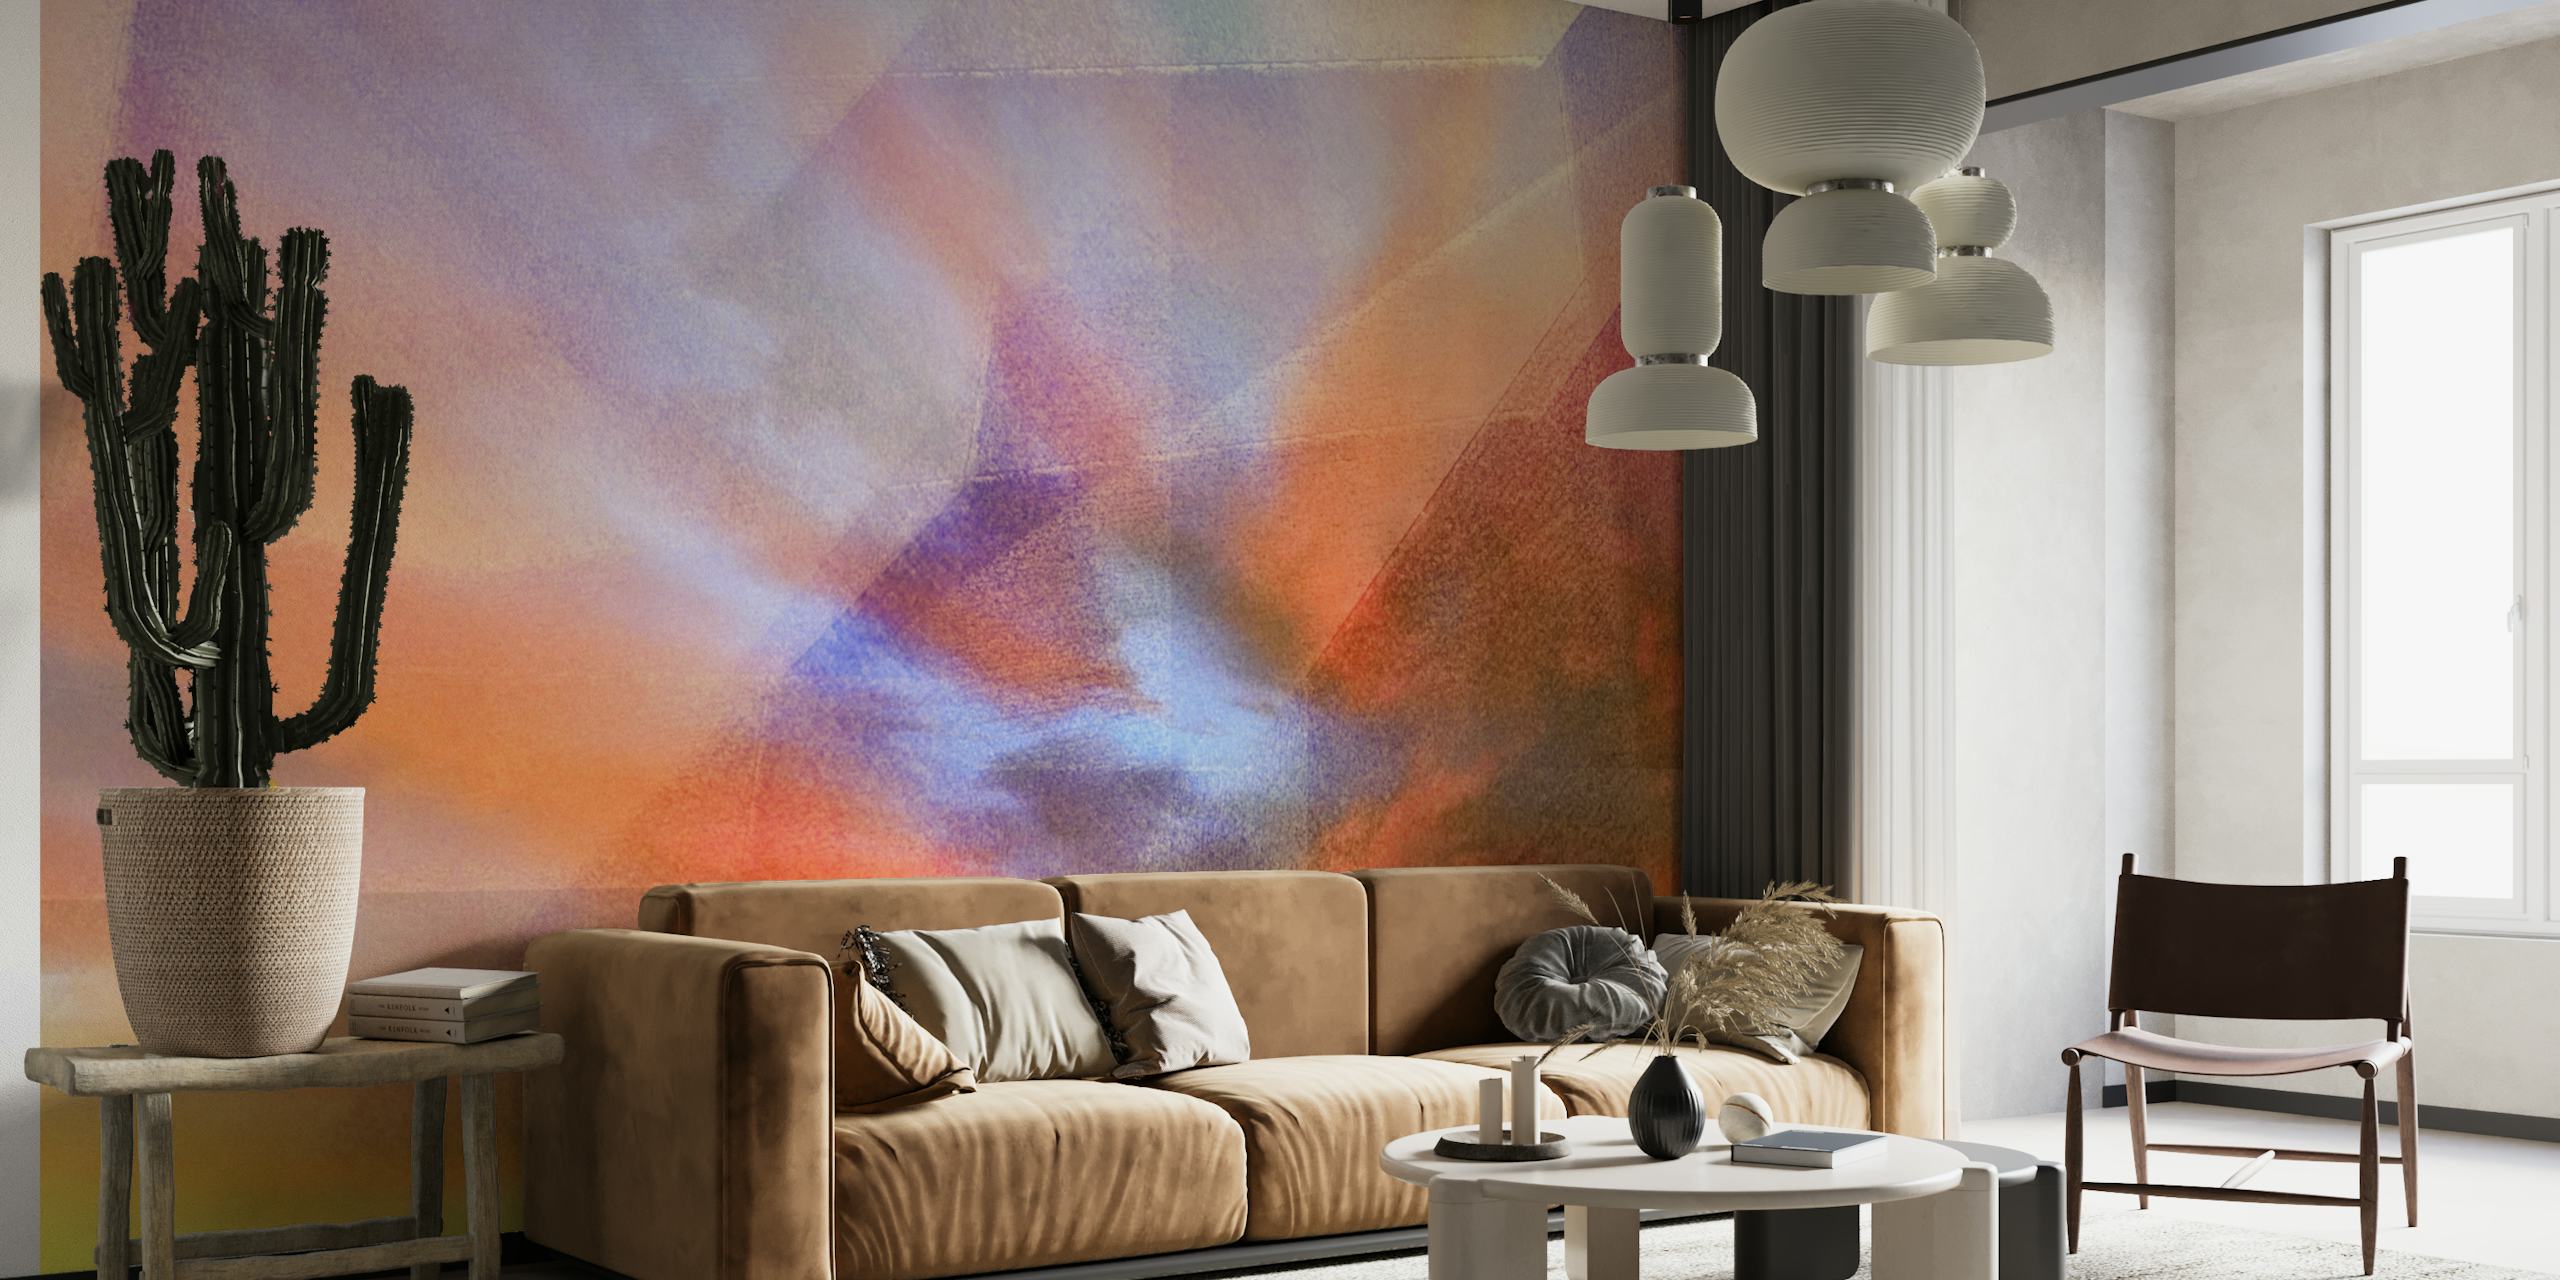 Abstract ethereal Eden Clouds wall mural with warm oranges, vibrant pinks, and cool blues